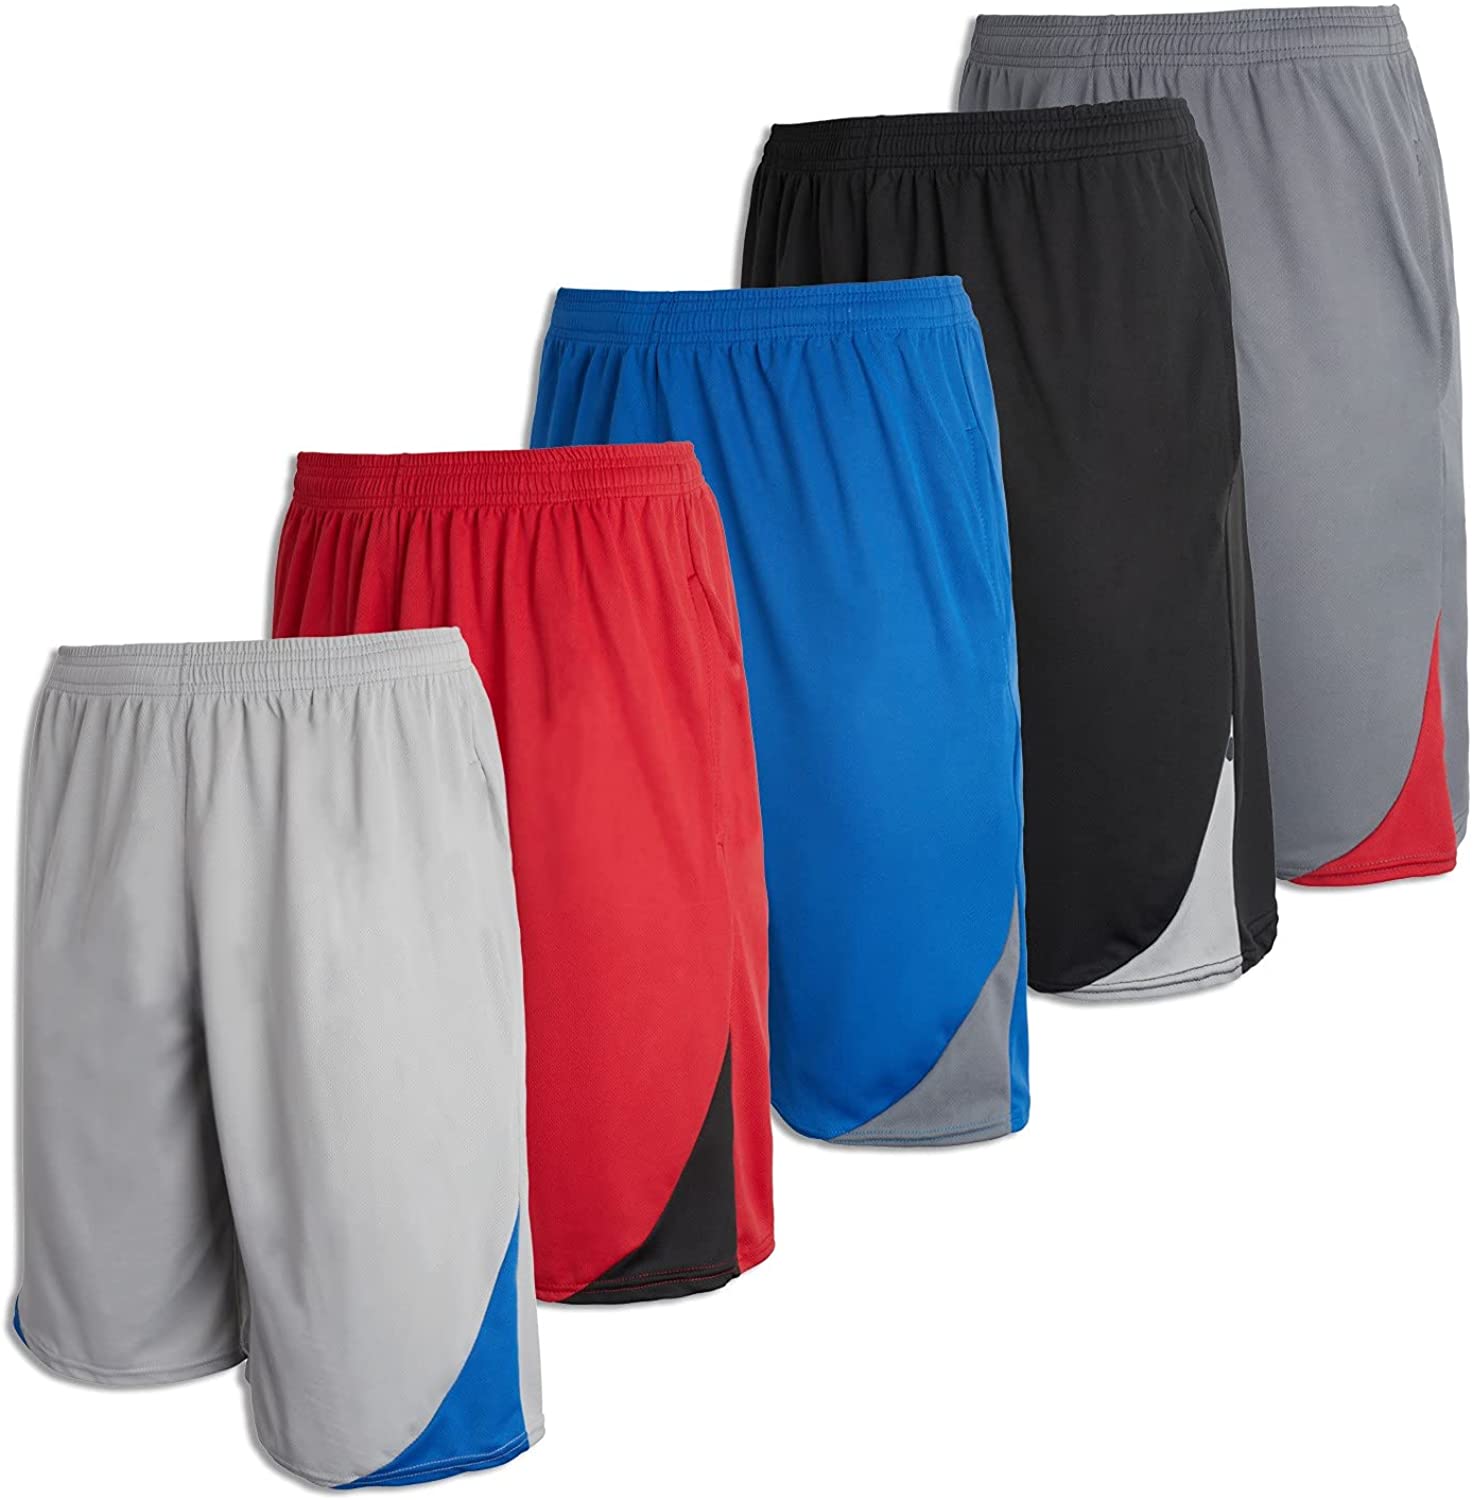 Essentials Boys Active Performance Woven Soccer Shorts 